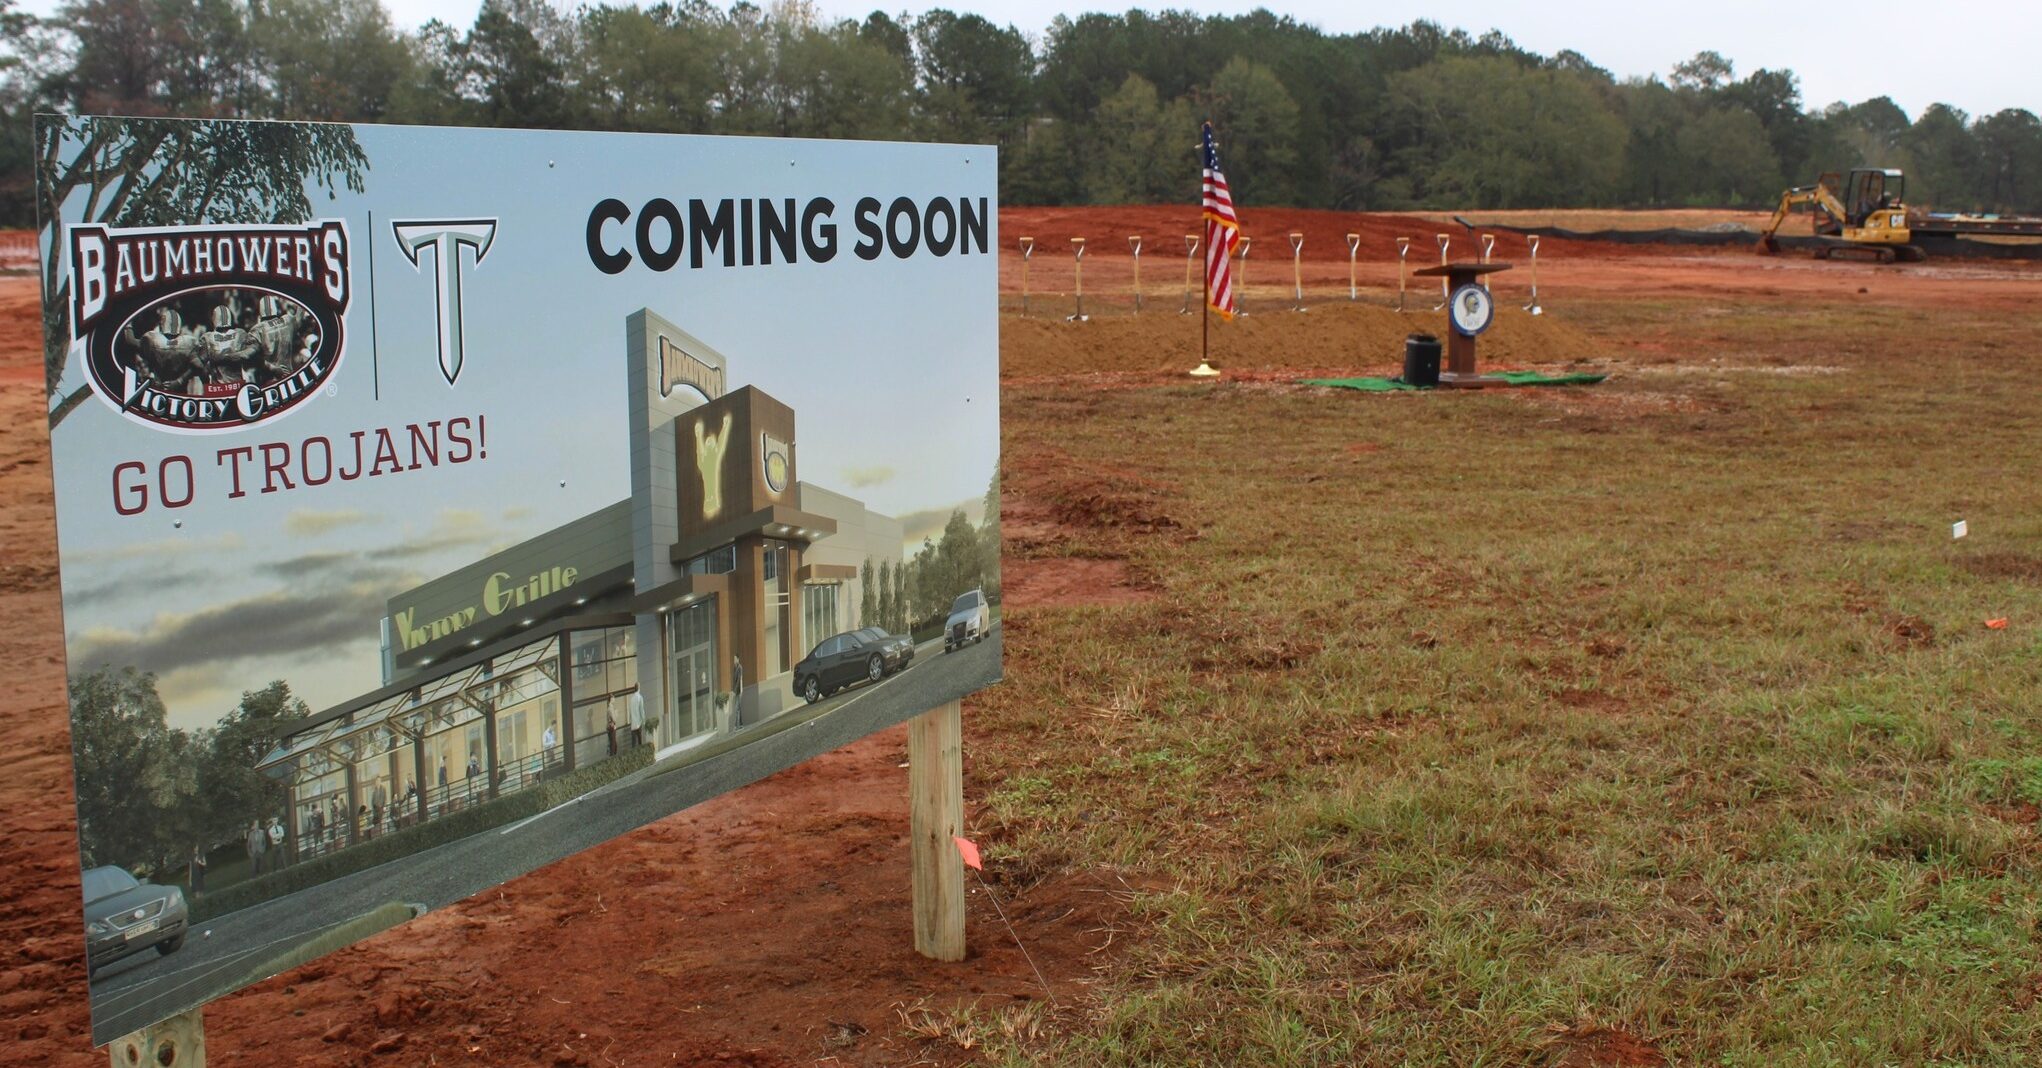   
																Baumhower’s Victory Grille breaks ground on 10th Alabama location in Troy 
															 